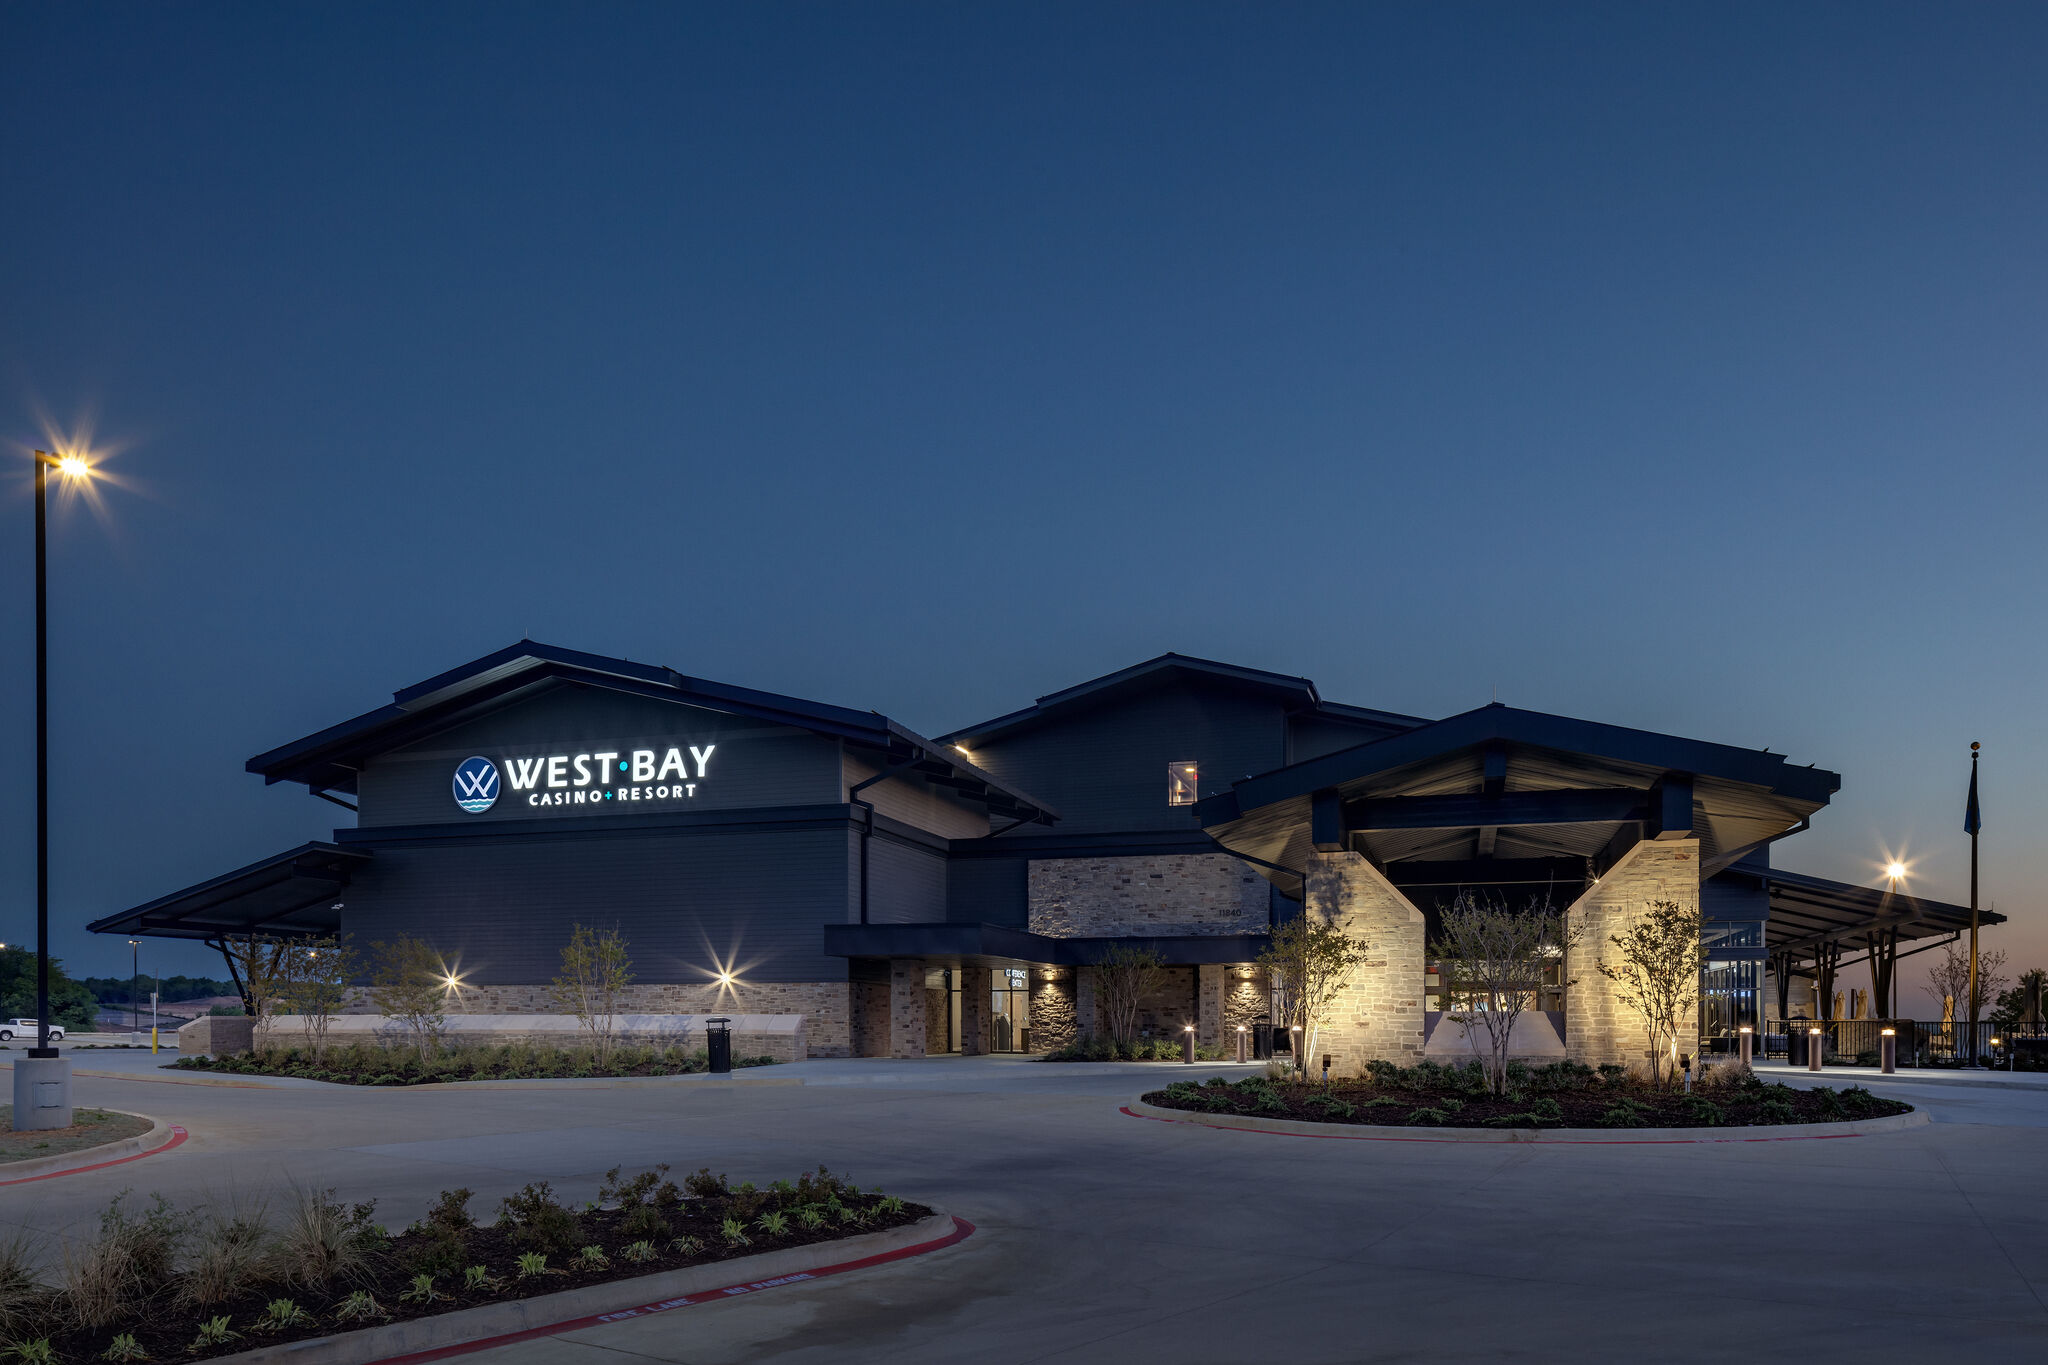 West Bay Casino and Resort Kingston, OK - Geotechnical and Construction Materials Testing